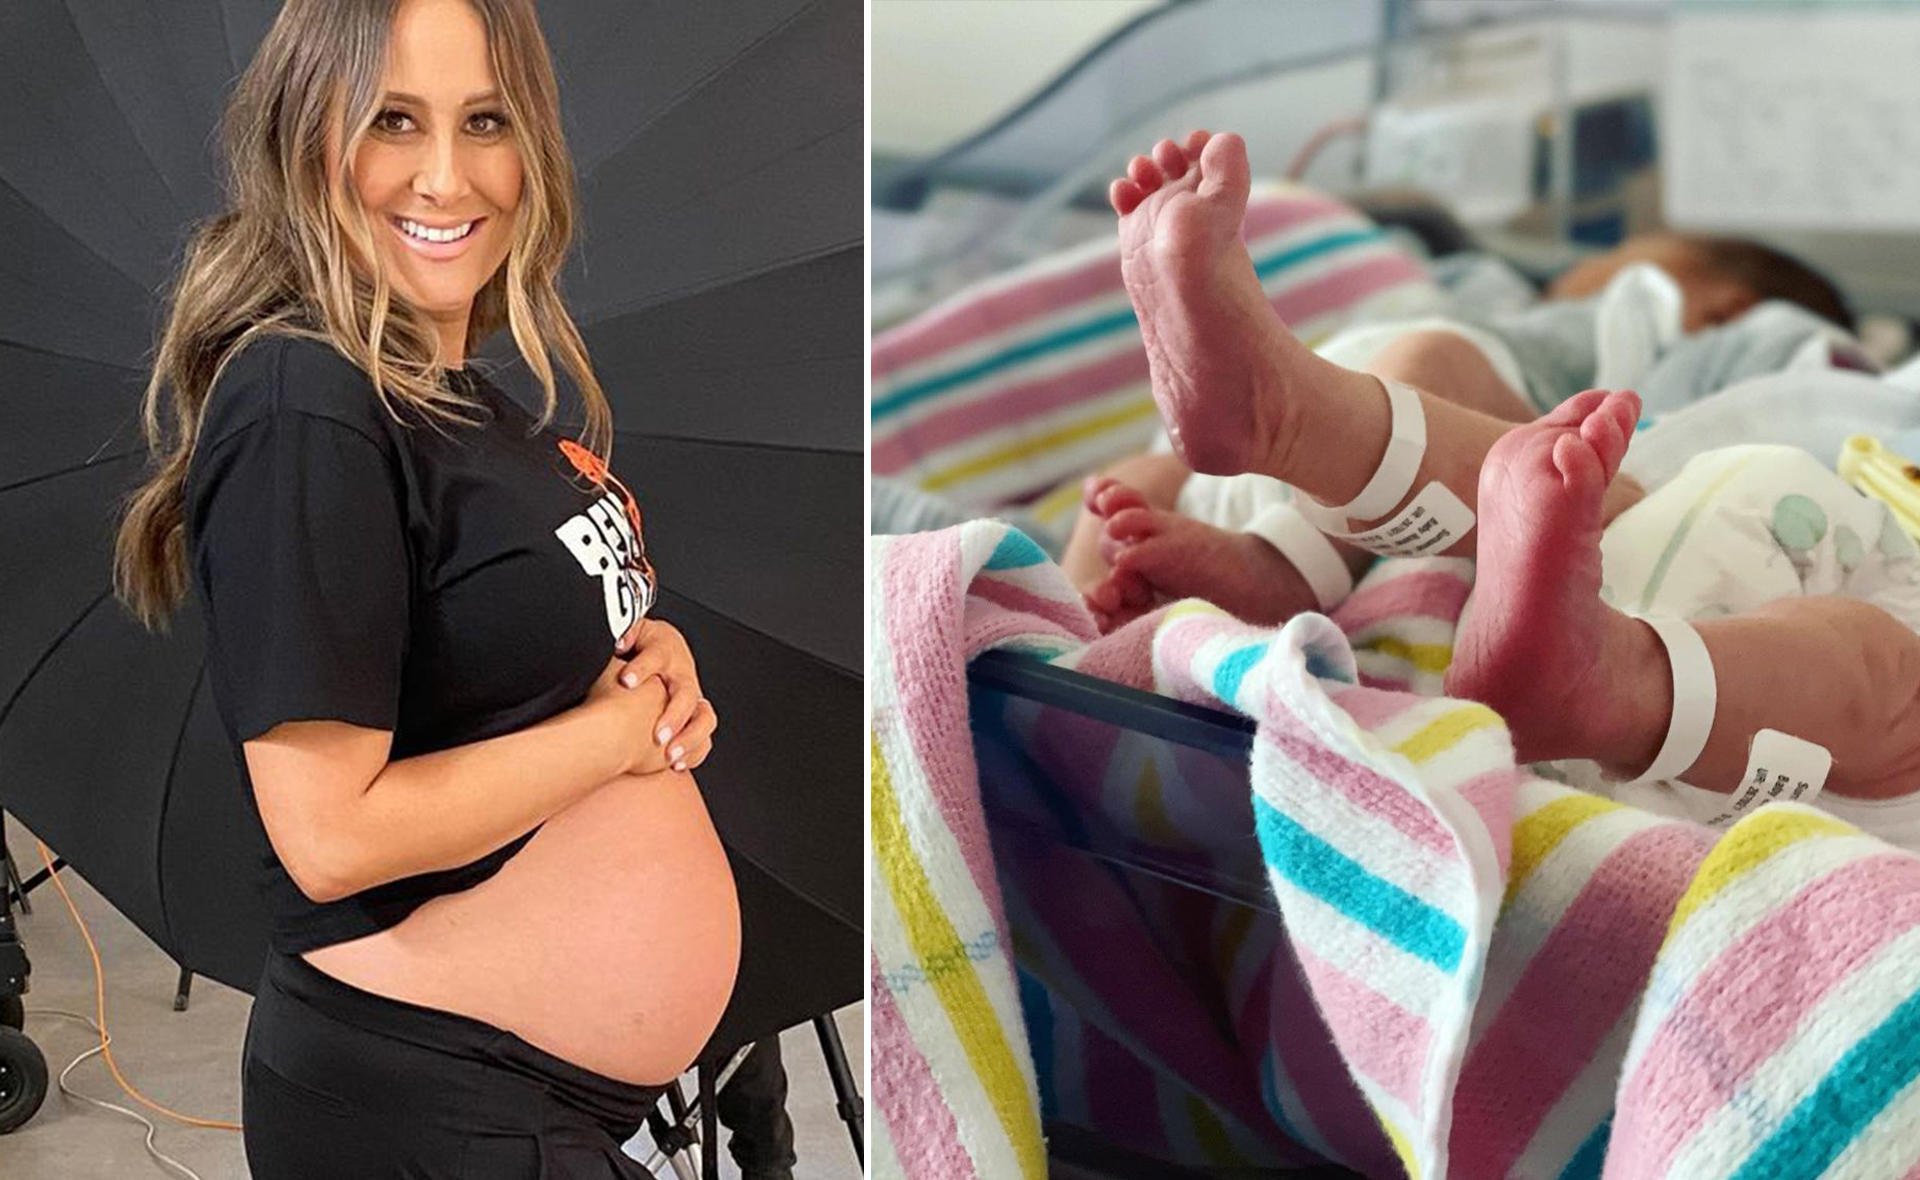 Double the joy! Real Housewives of Melbourne star Jackie Gillies welcomes miracle twins after long fertility battle